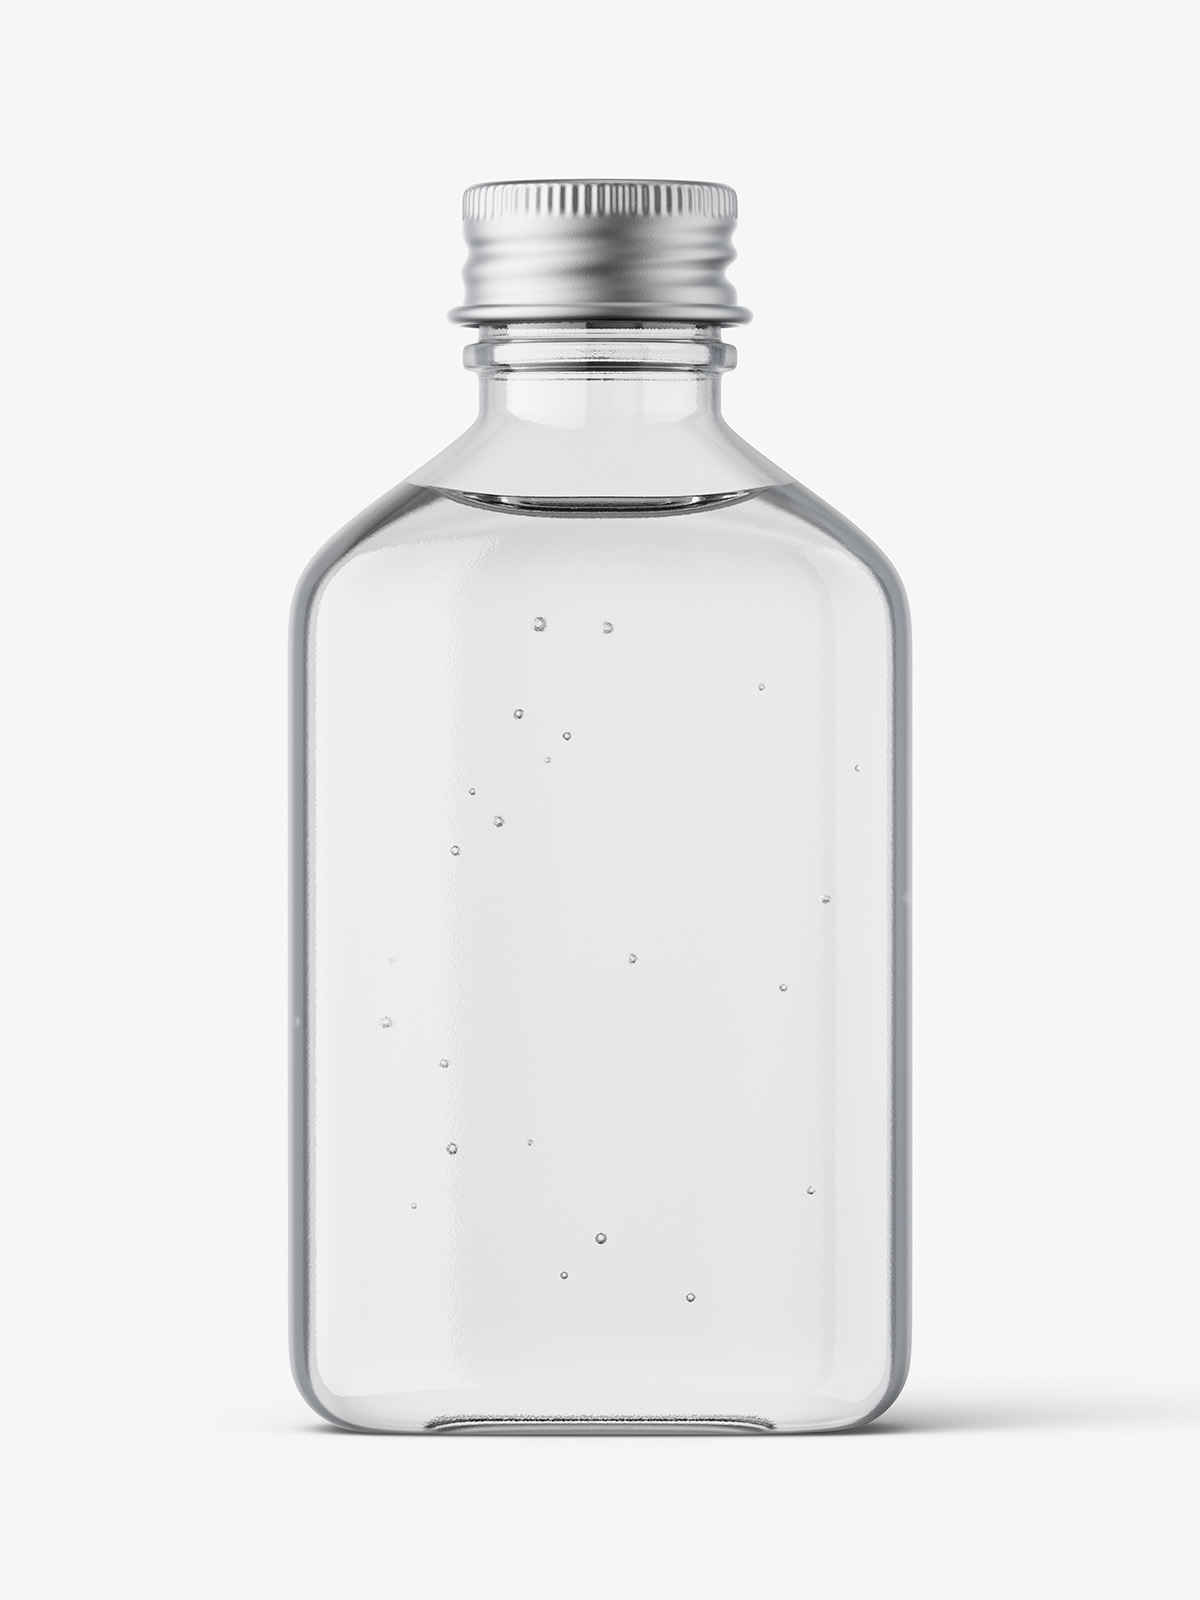 Download Square Bottle With Silver Cap Mockup Clear Smarty Mockups